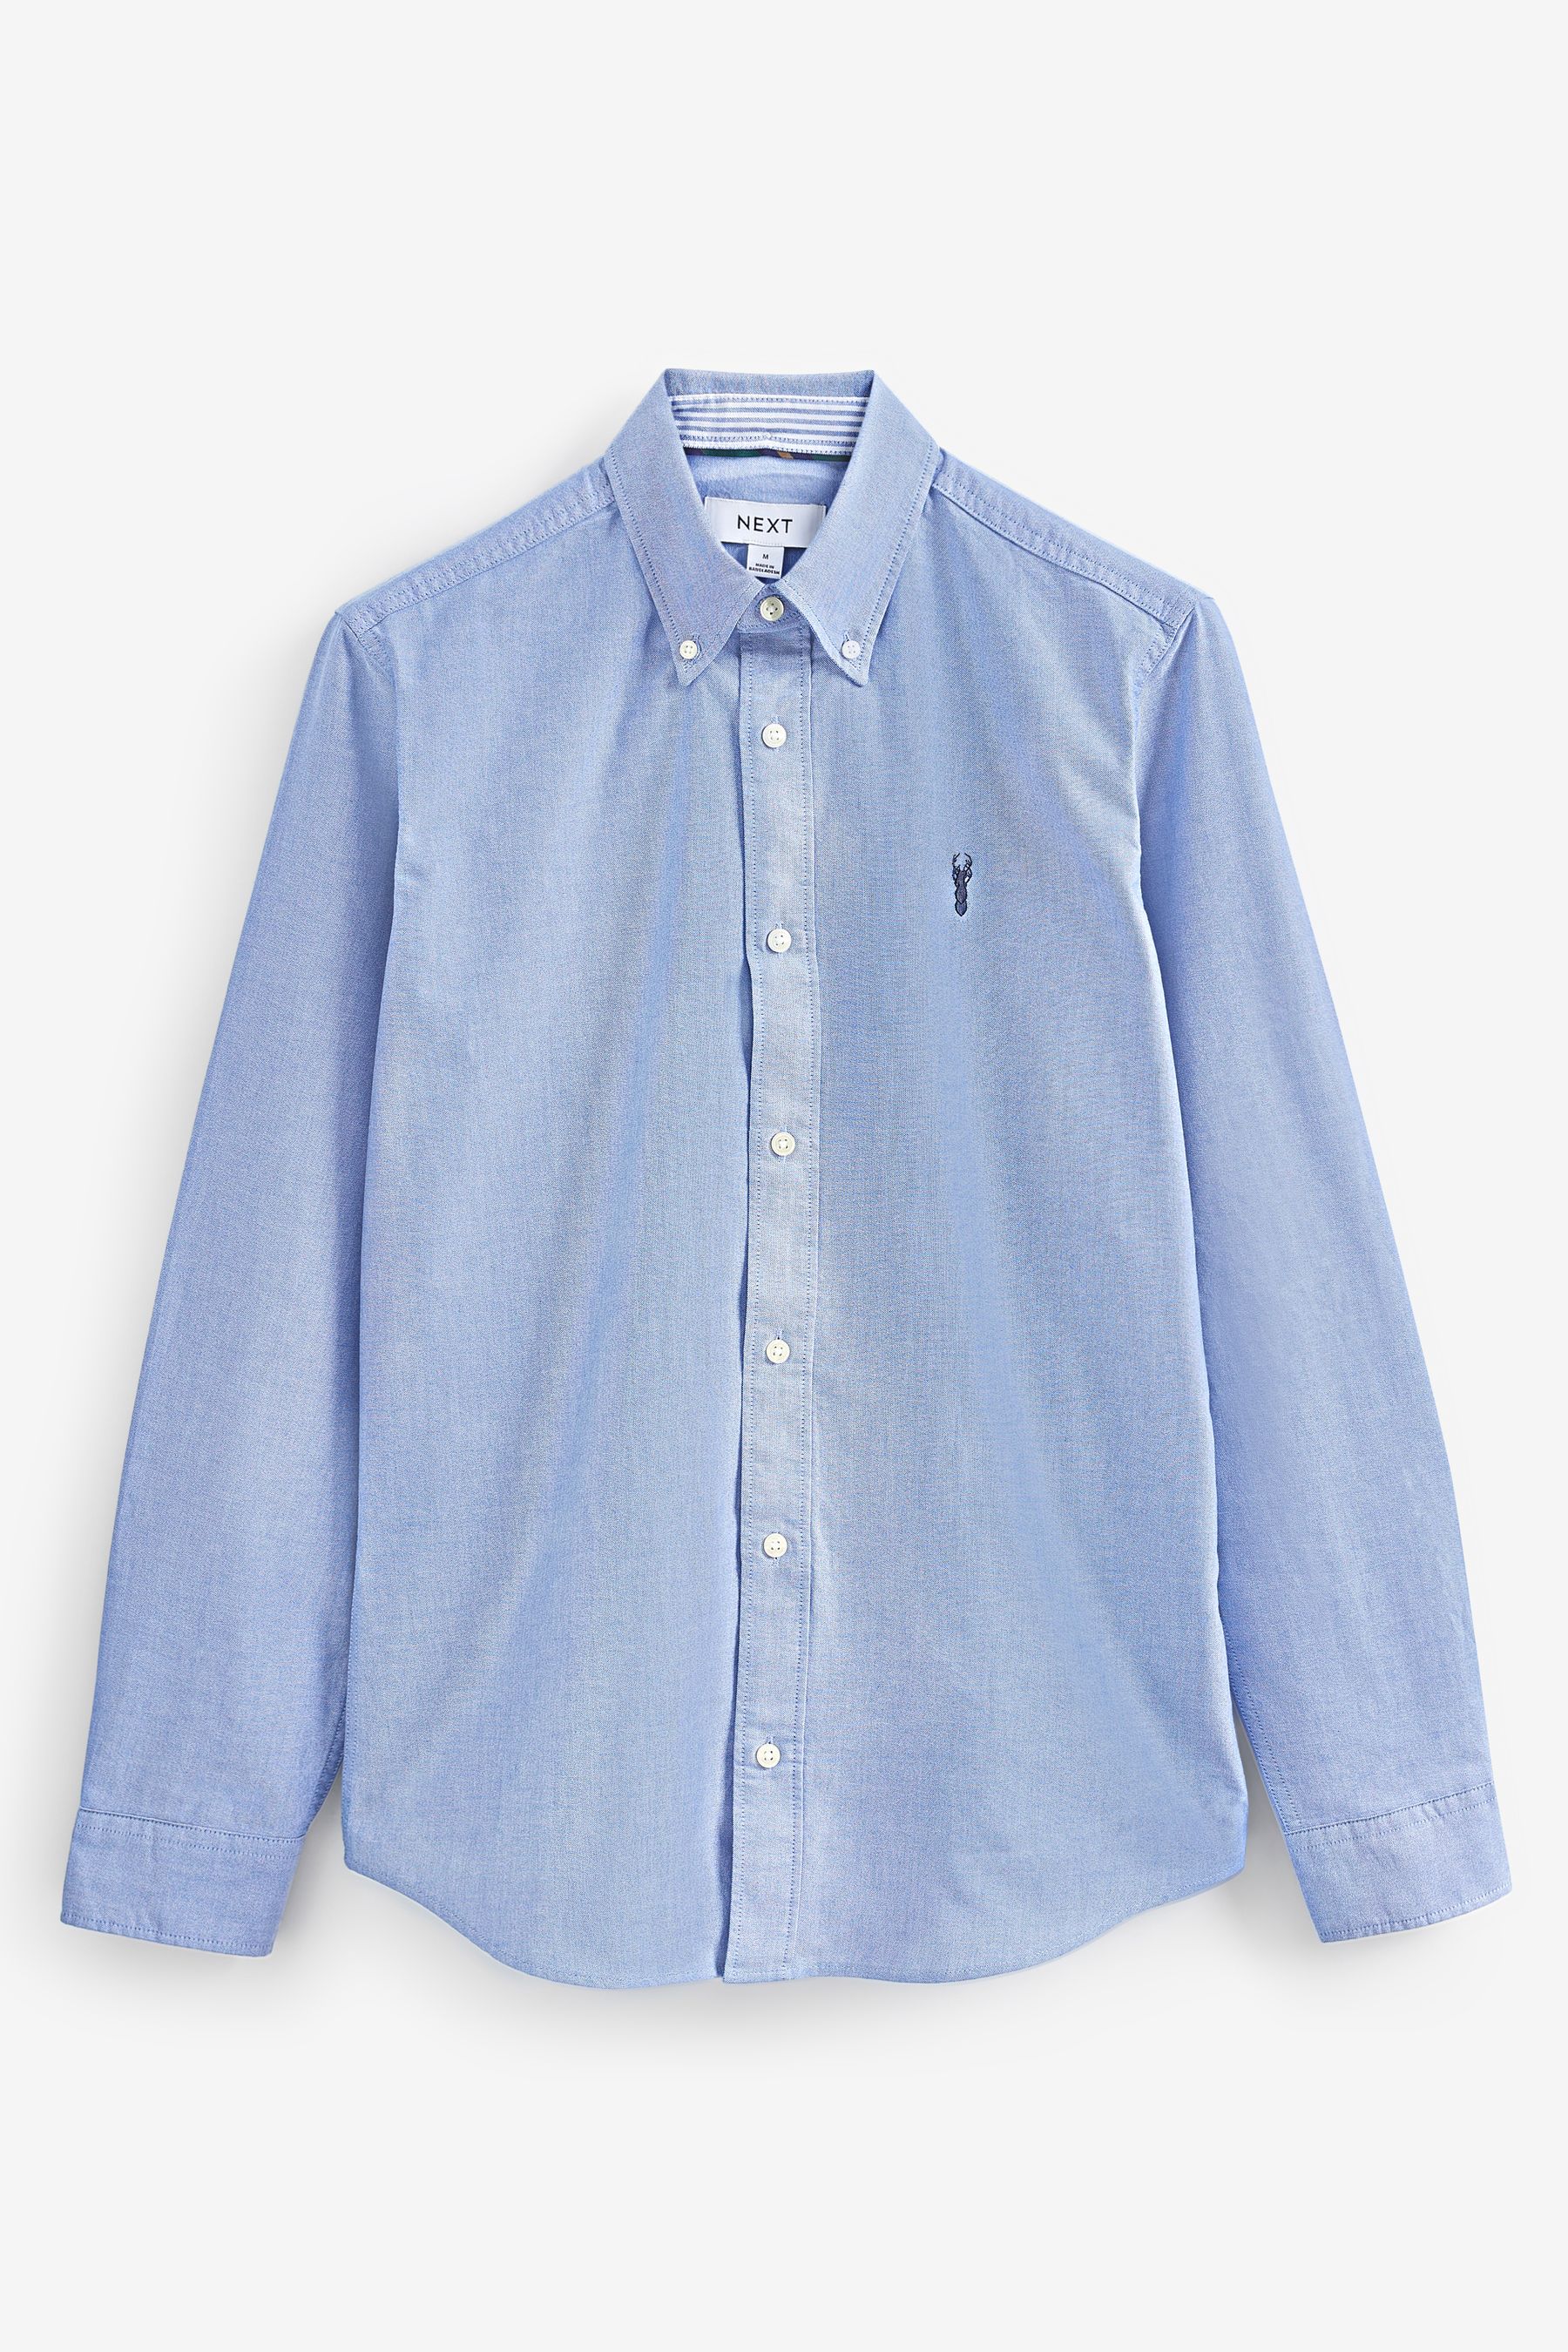 Buy Light Blue Slim Fit Long Sleeve Oxford Shirt from Next India